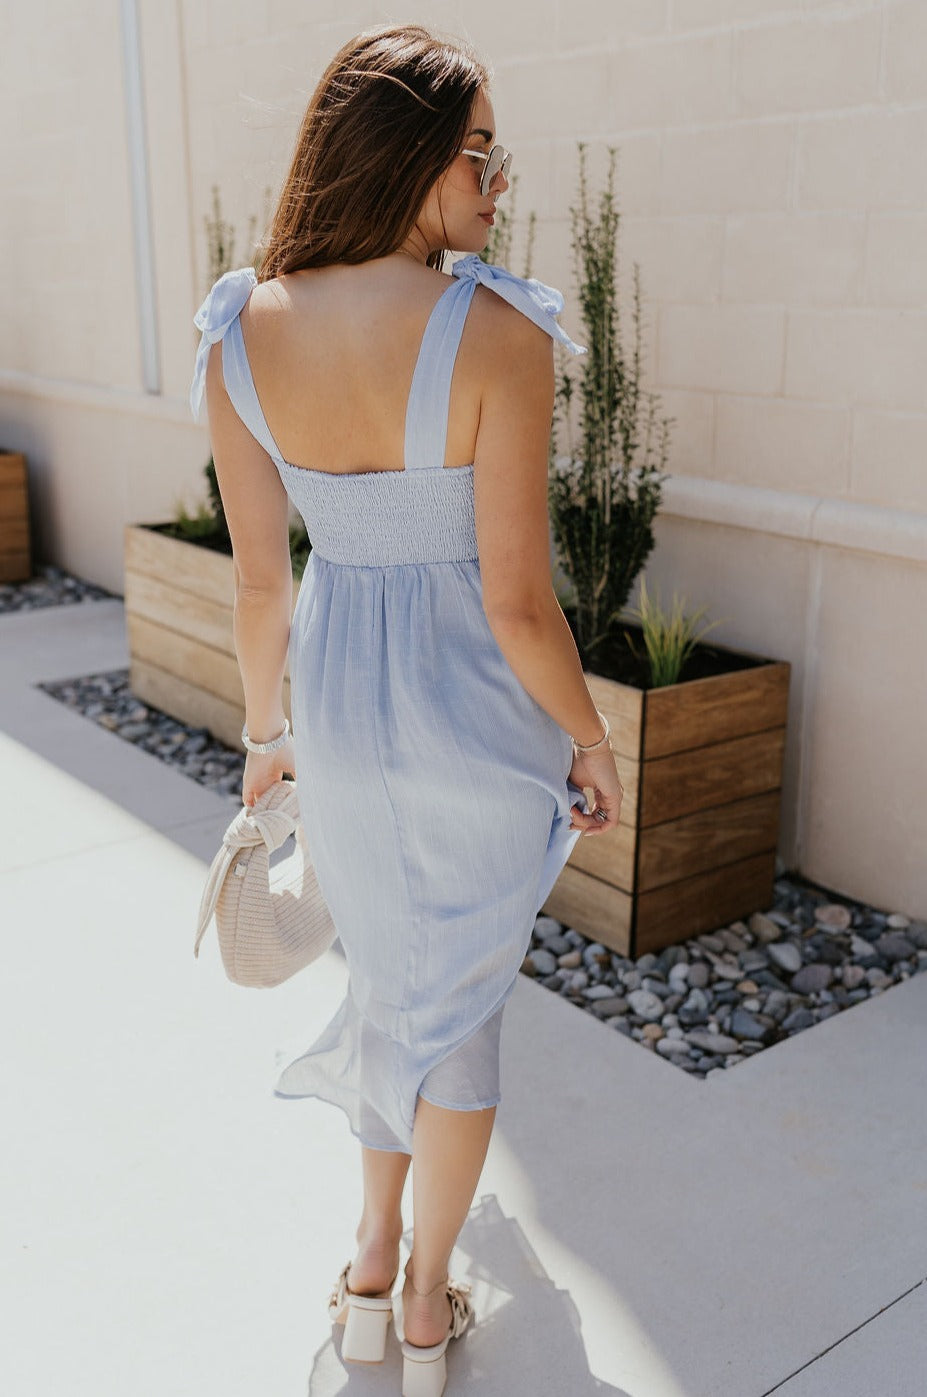 Full body back view of female model wearing the Laurel Light Blue Slit Midi Dress which features Light Blue Lightweight Fabric, Ruffle Hem, Light Blue Lining, Midi Length, Textured Details, Square Neckline and Tie Straps